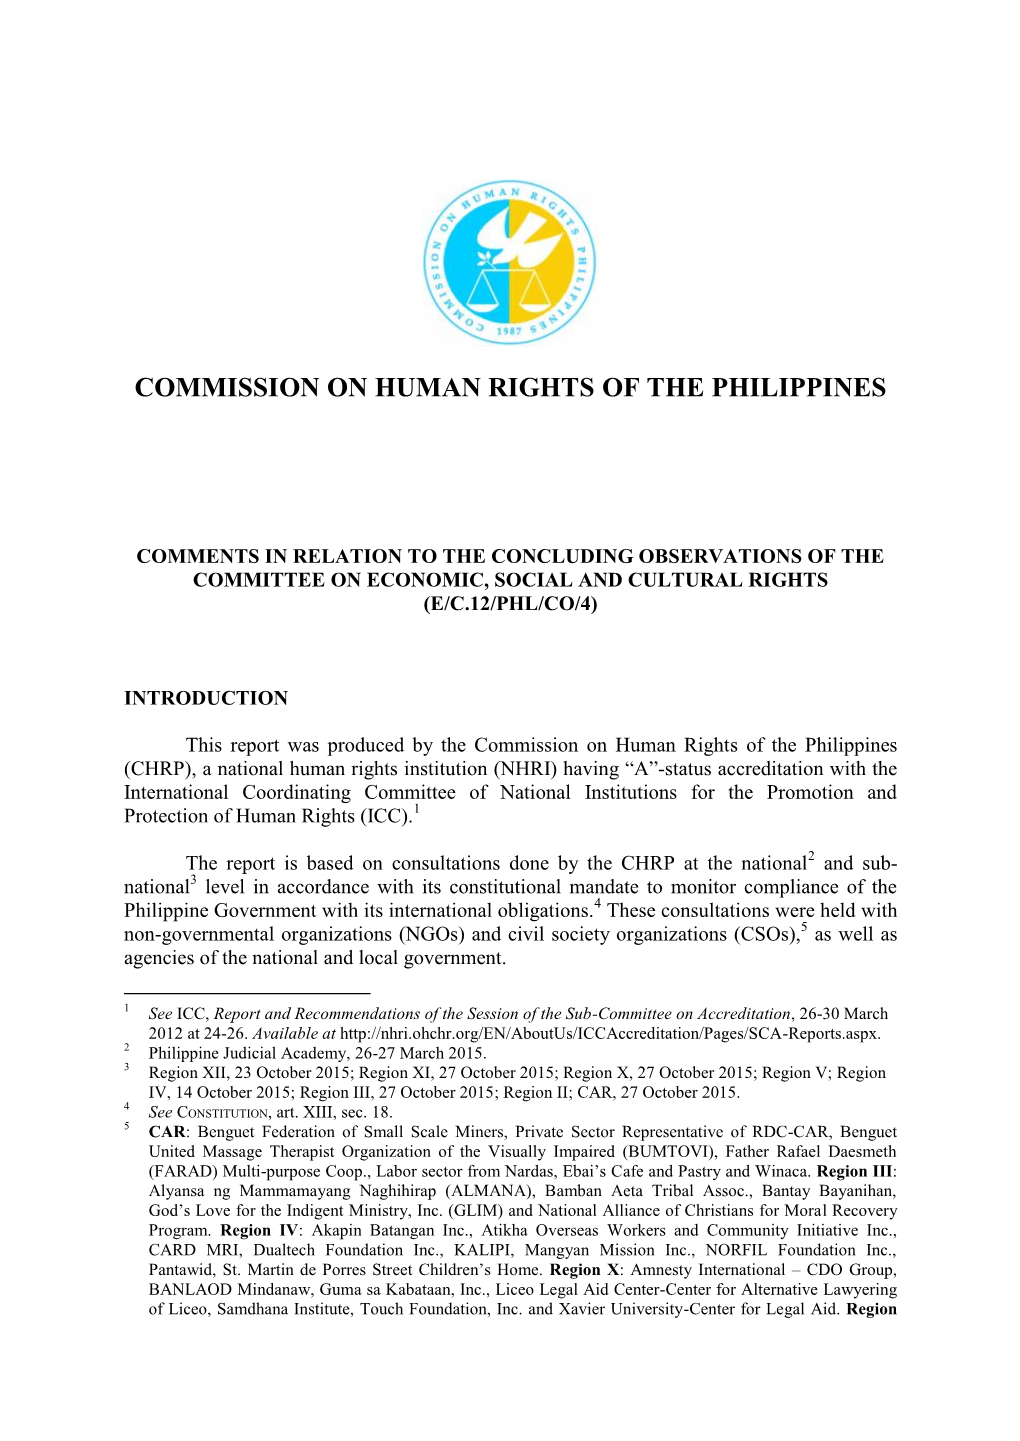 Commission on Human Rights of the Philippines